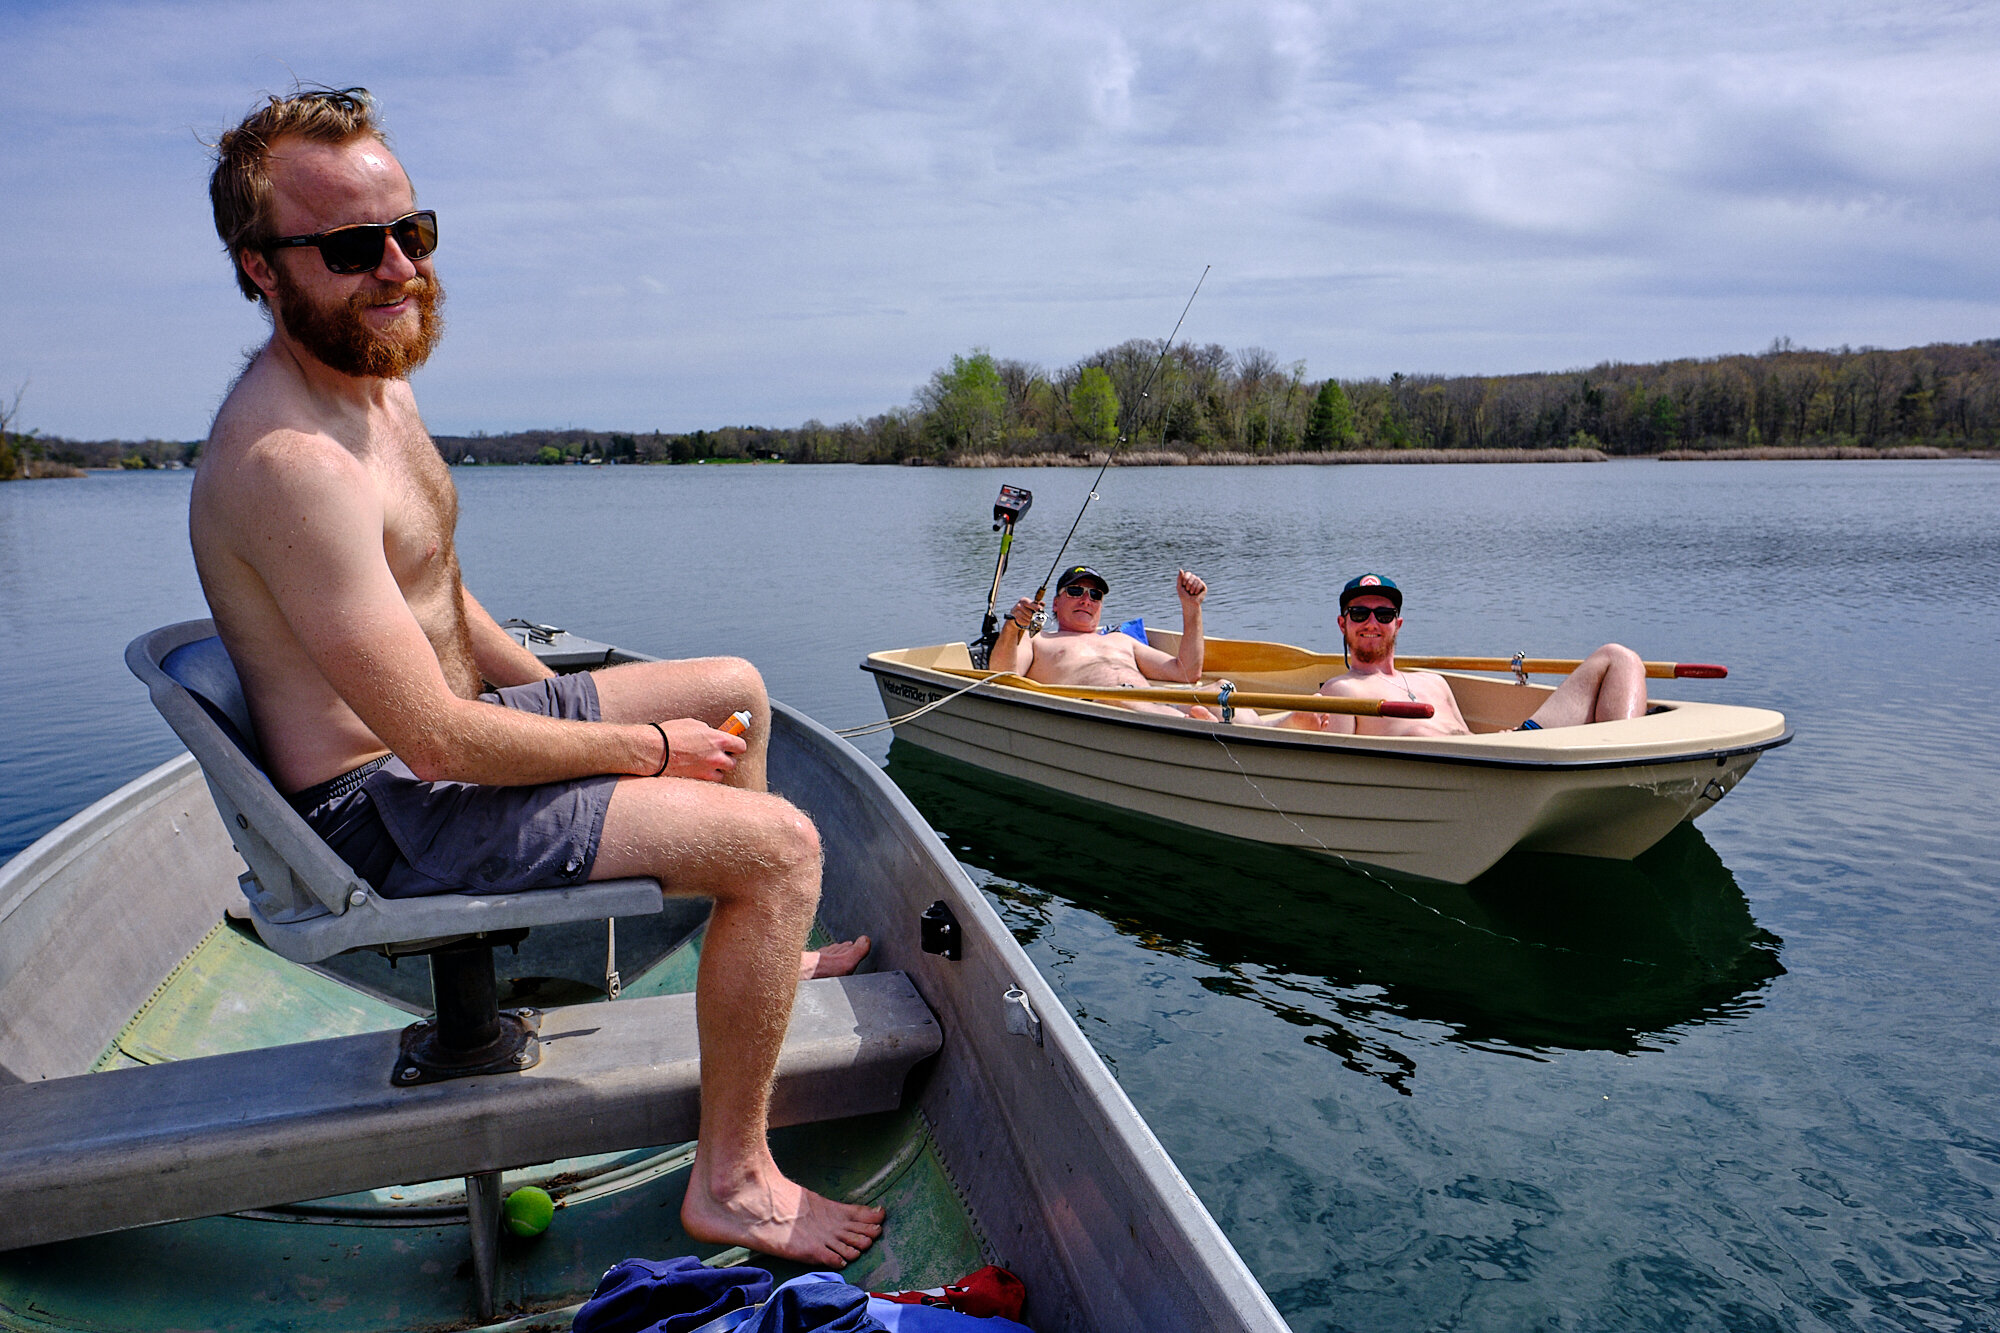  A day spent fishing on an empty lake is always a good day. Here Lebowski and Blankie soak up the sun while Andy lazily works on hooking a prize fish. | 5/4/20 Pinckney, MI 